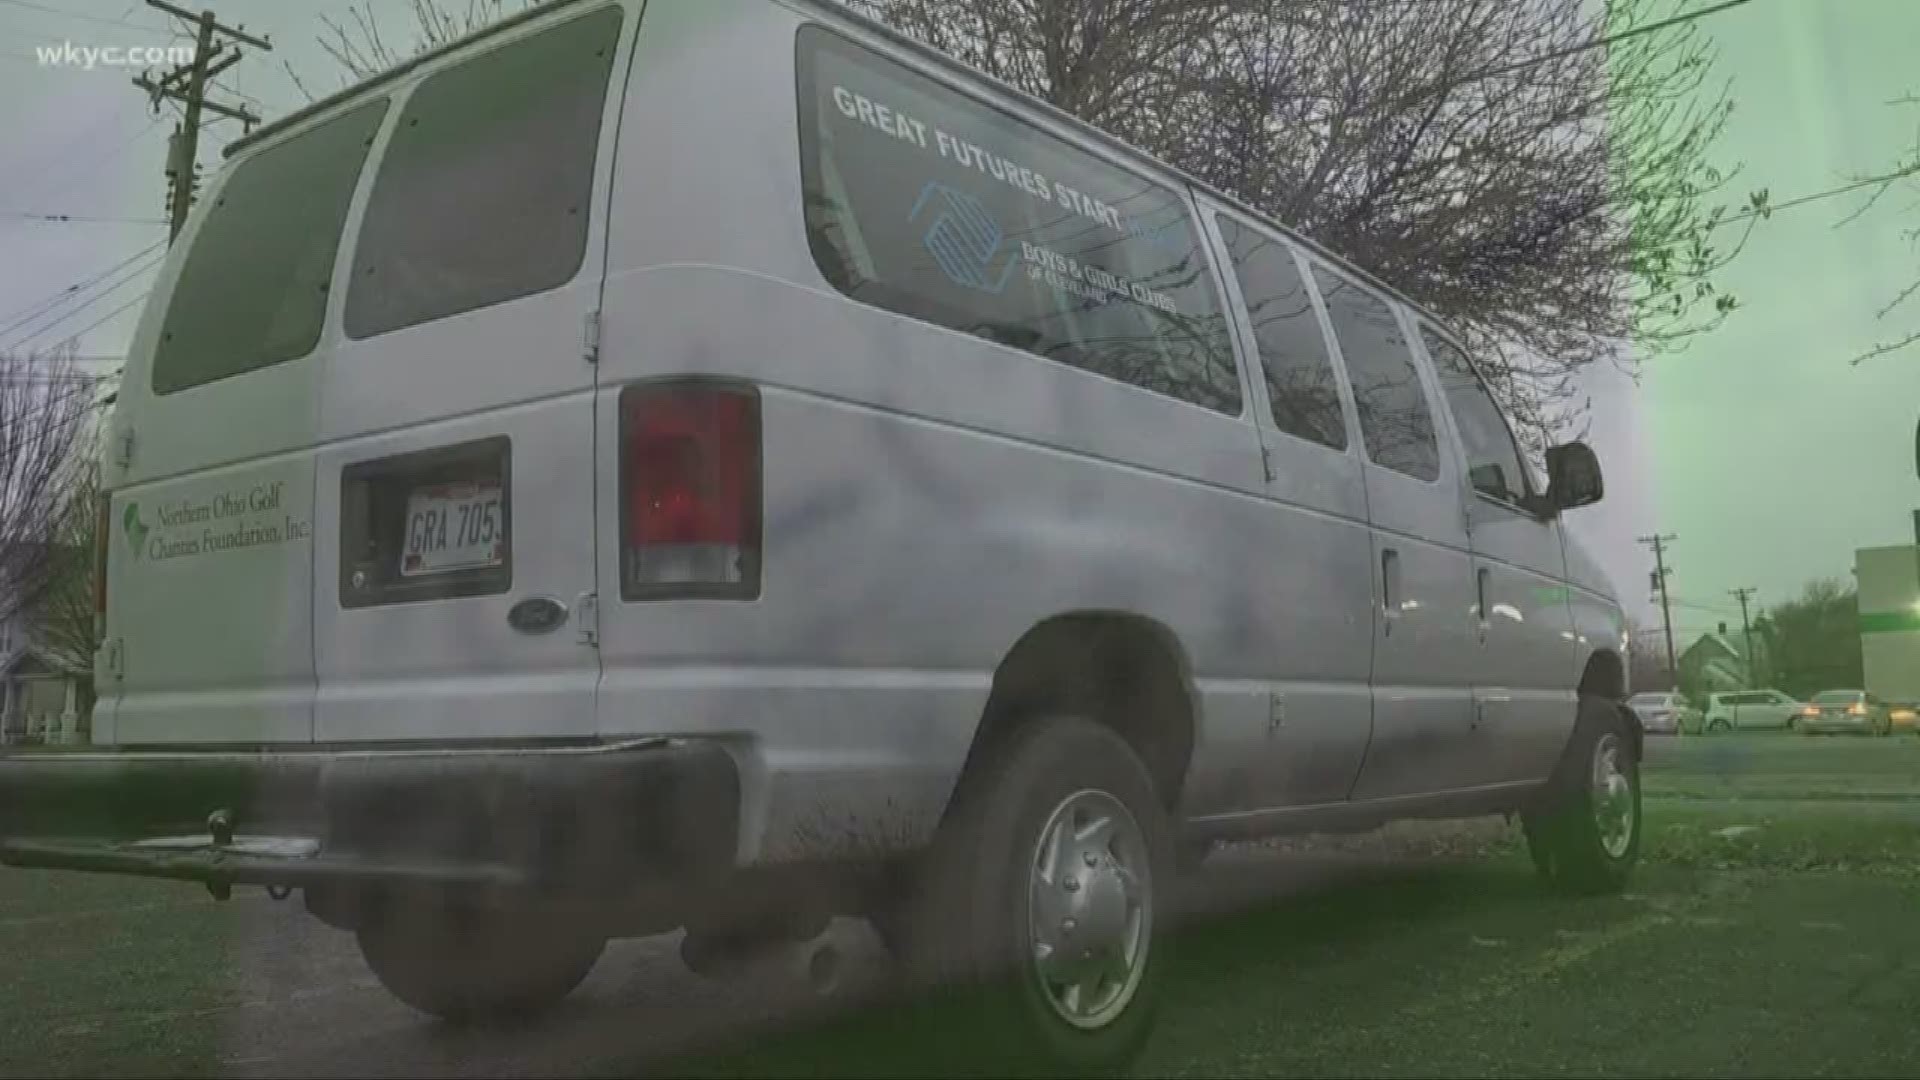 two vans stolen from Boys and Girls Club in Cleveland